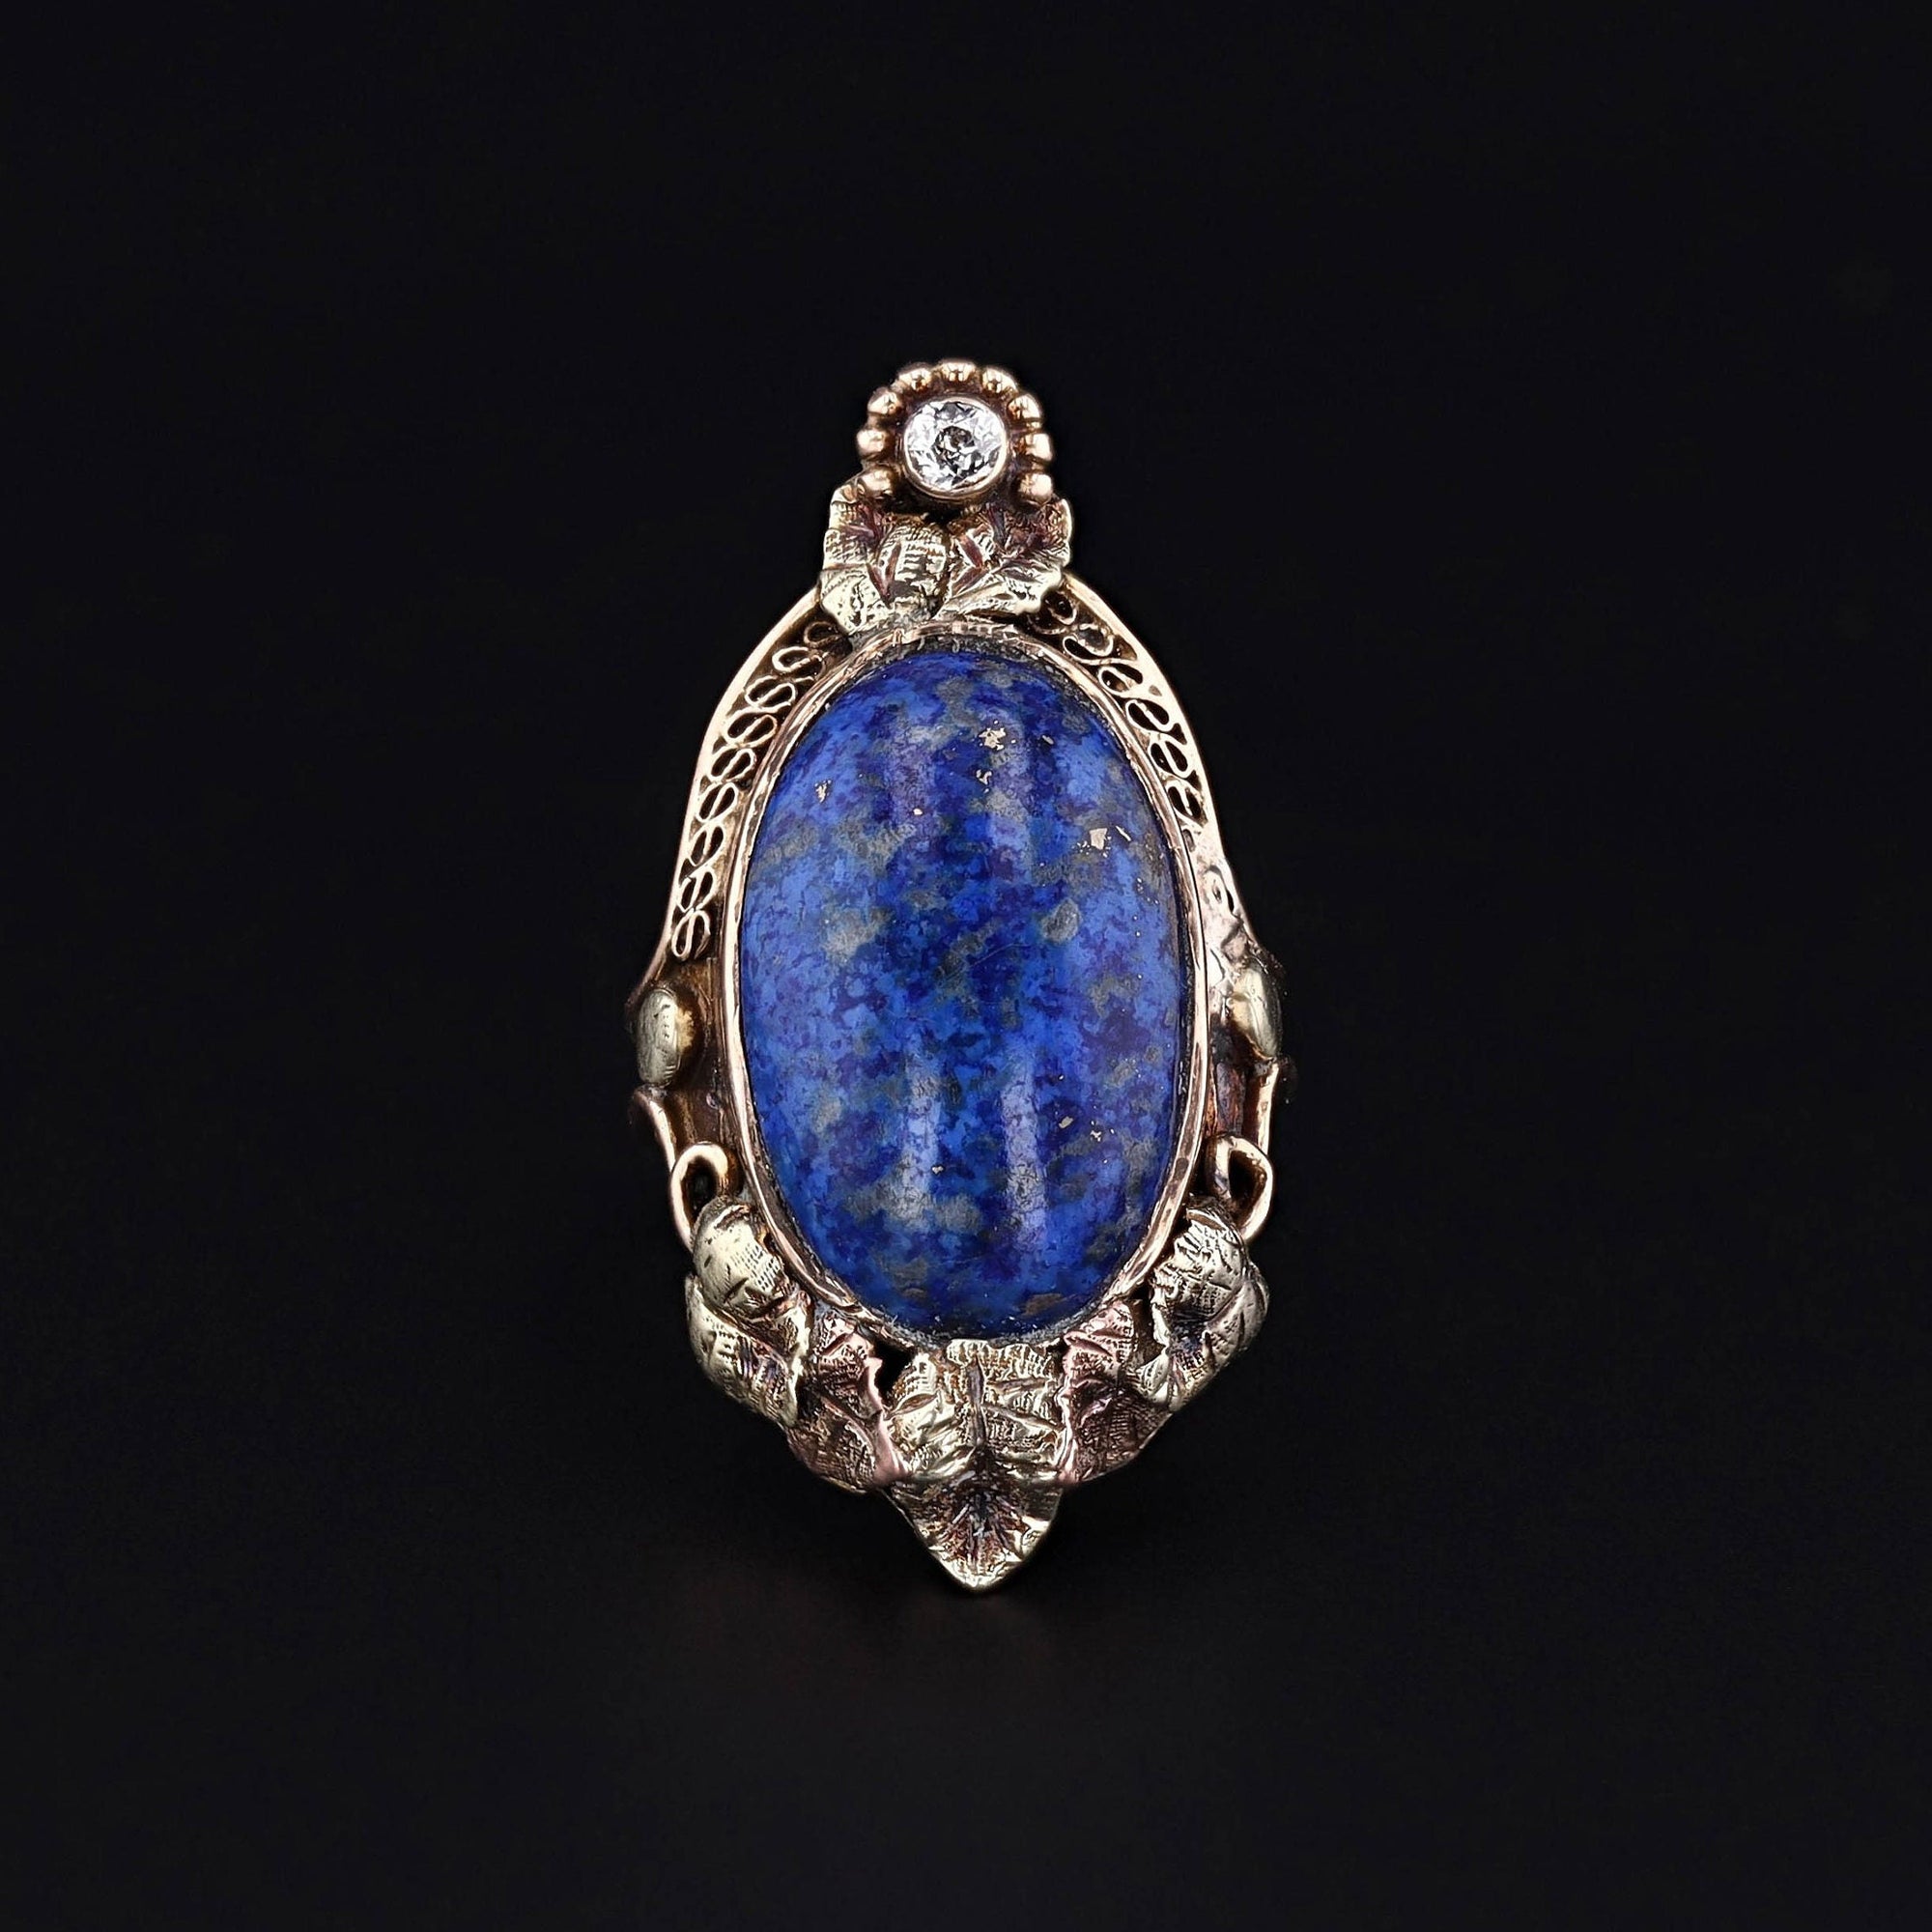 Antique Lapis Lazuli and Diamond Ring Yellow Gold with Rose and Green Gold Accents